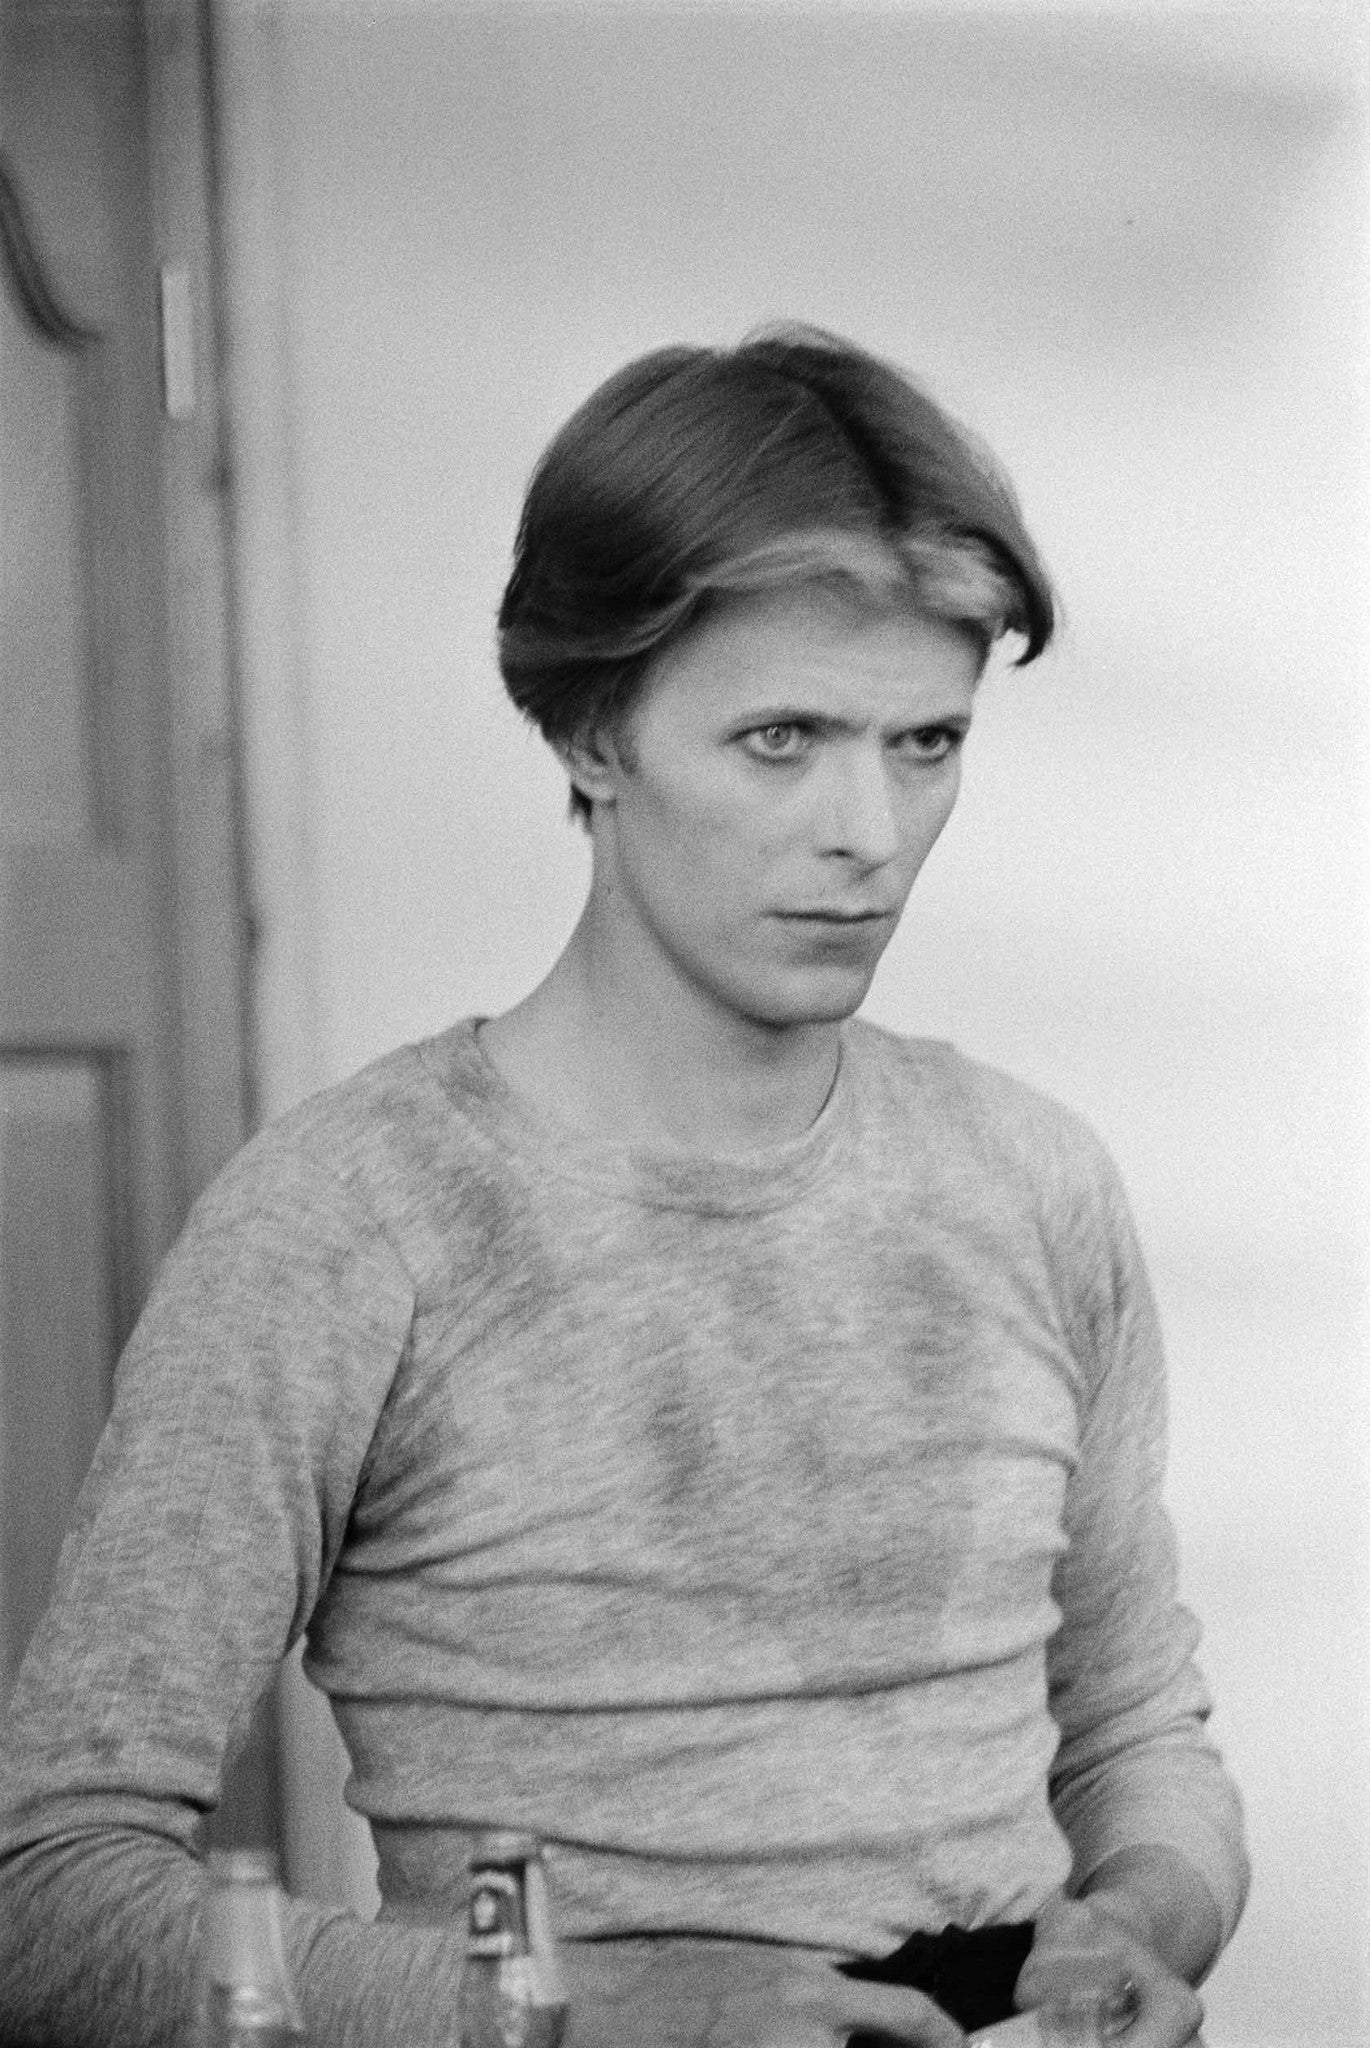 David Bowie: The Man Who Fell To Earth, 1975 by Geoff MacCormack